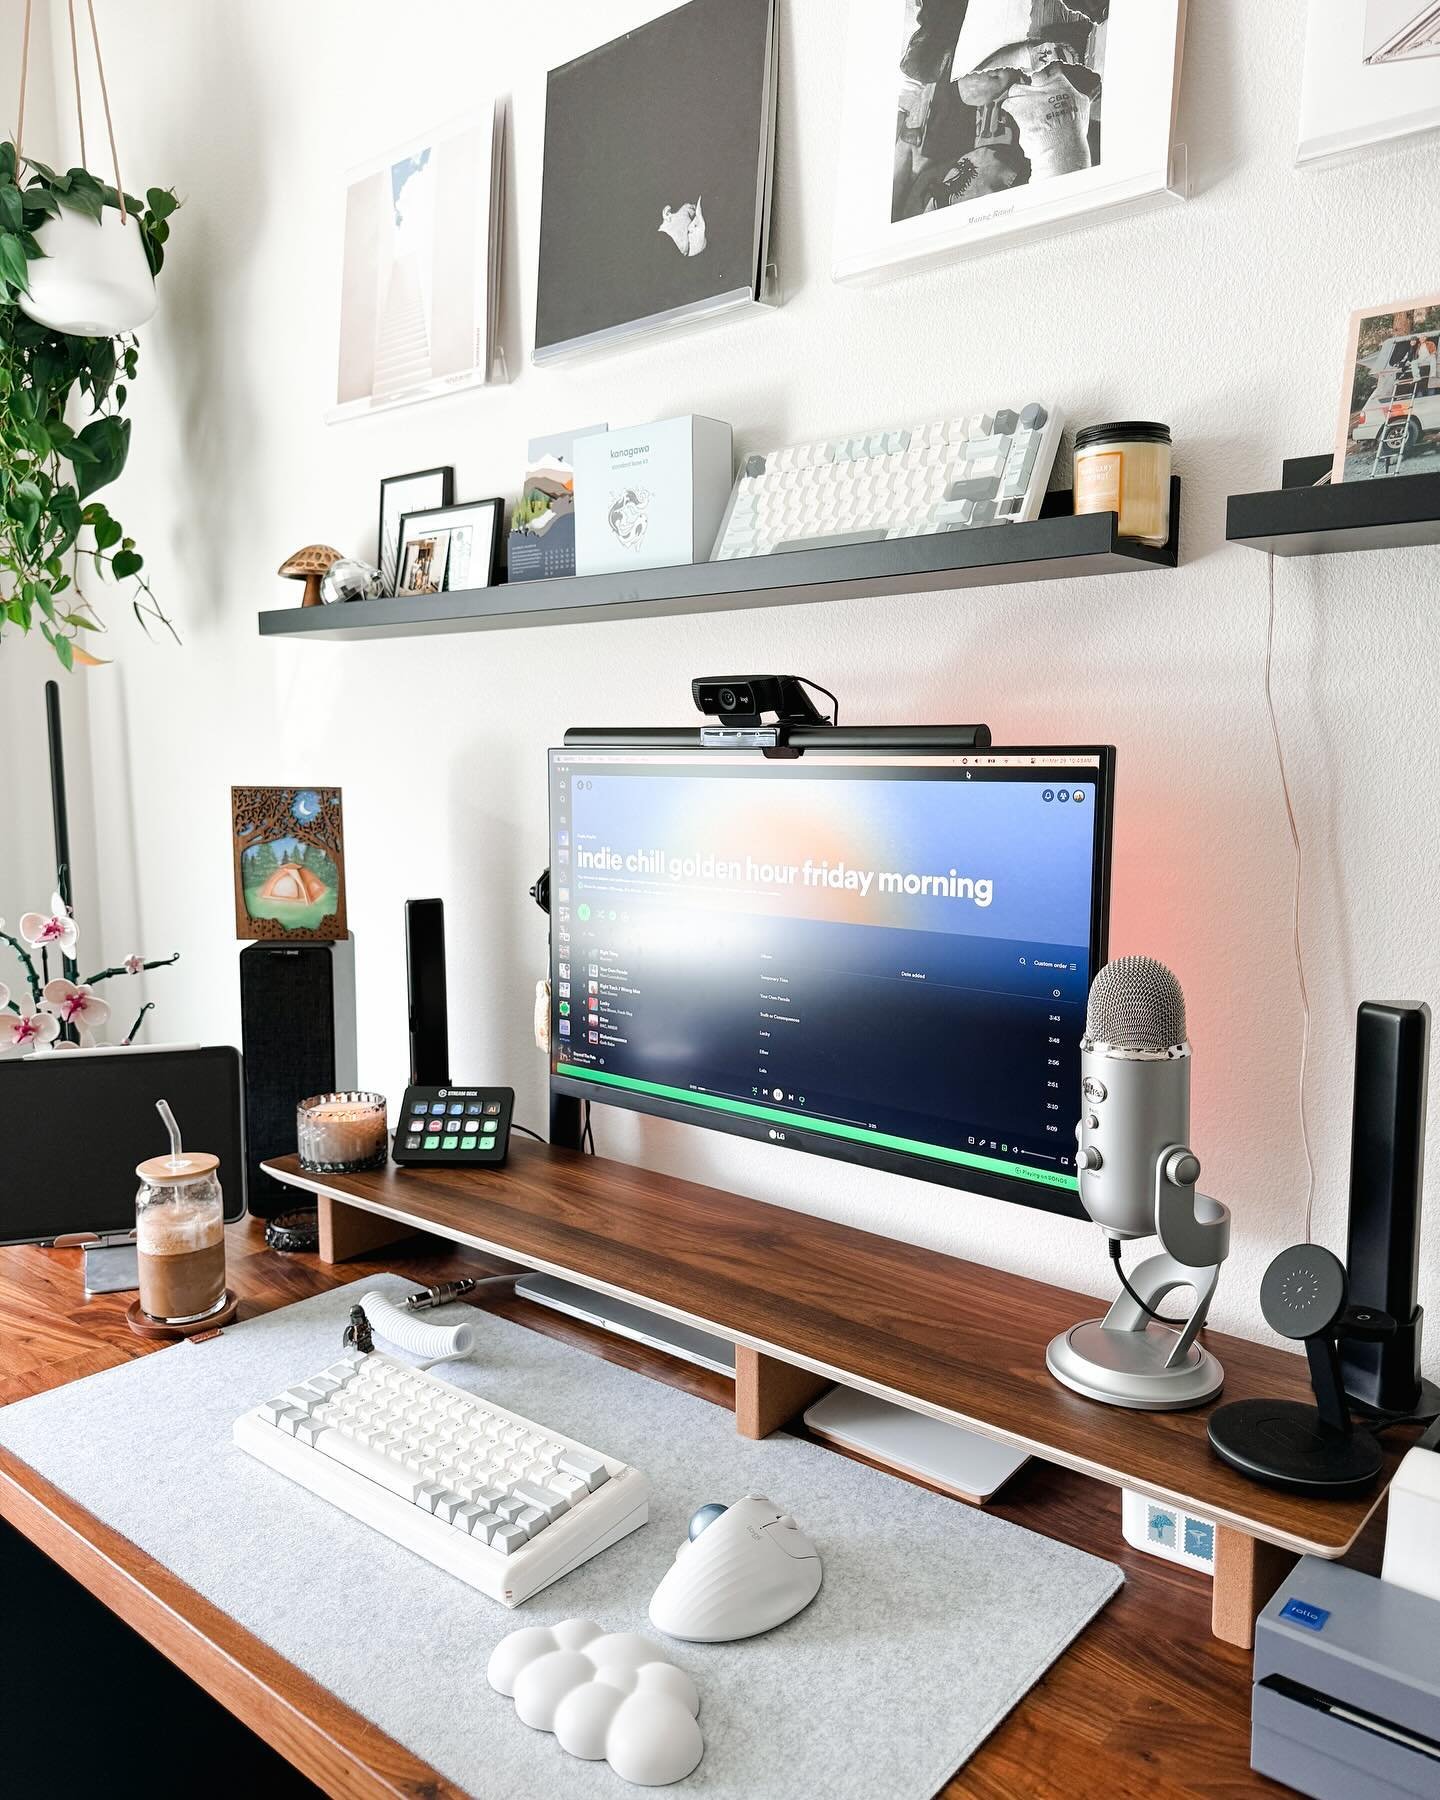 according to @spotify, it&rsquo;s an indie chill golden hour Friday morning 🌞

#workfromhome #wfhlife #wfhvlog #smallbusinesscheck #smallbizlife #smallbusinessowner #cozysetup #deskterior #deskaesthetic #cozyaesthetic #desksetup #deskdecor #deskgoal